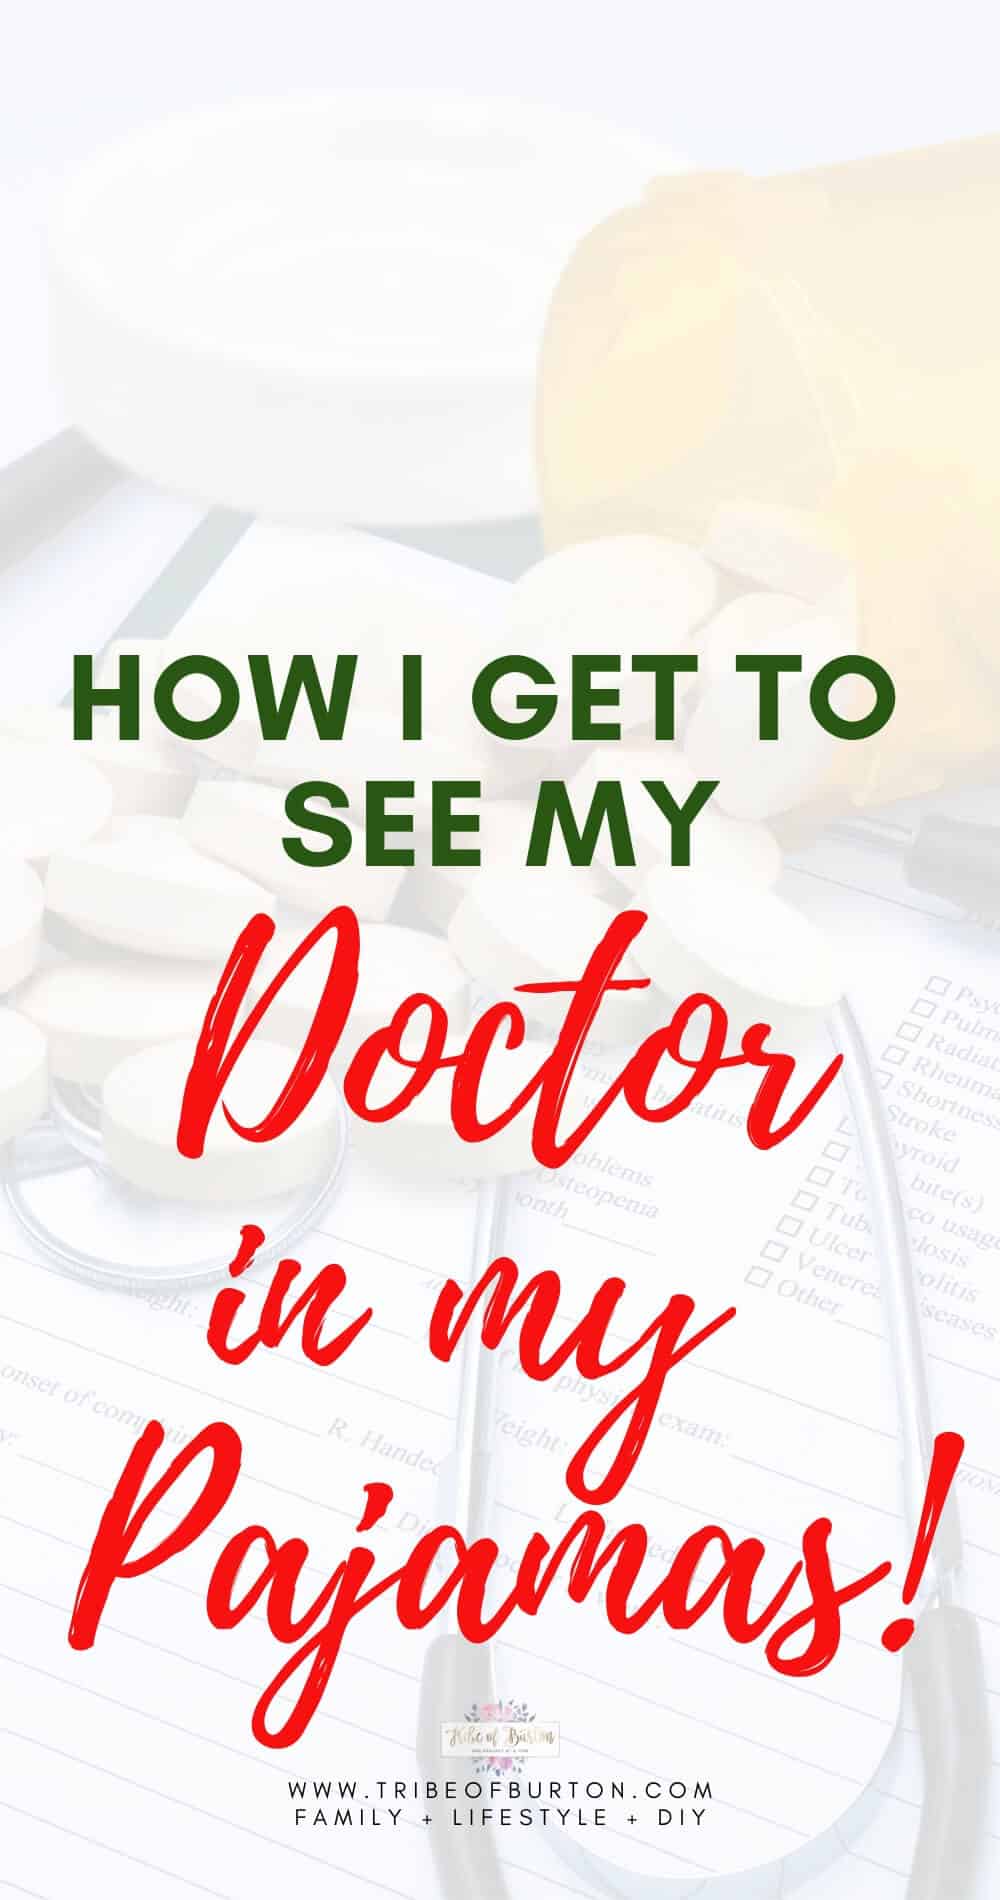 See your doctor in your pajamas.